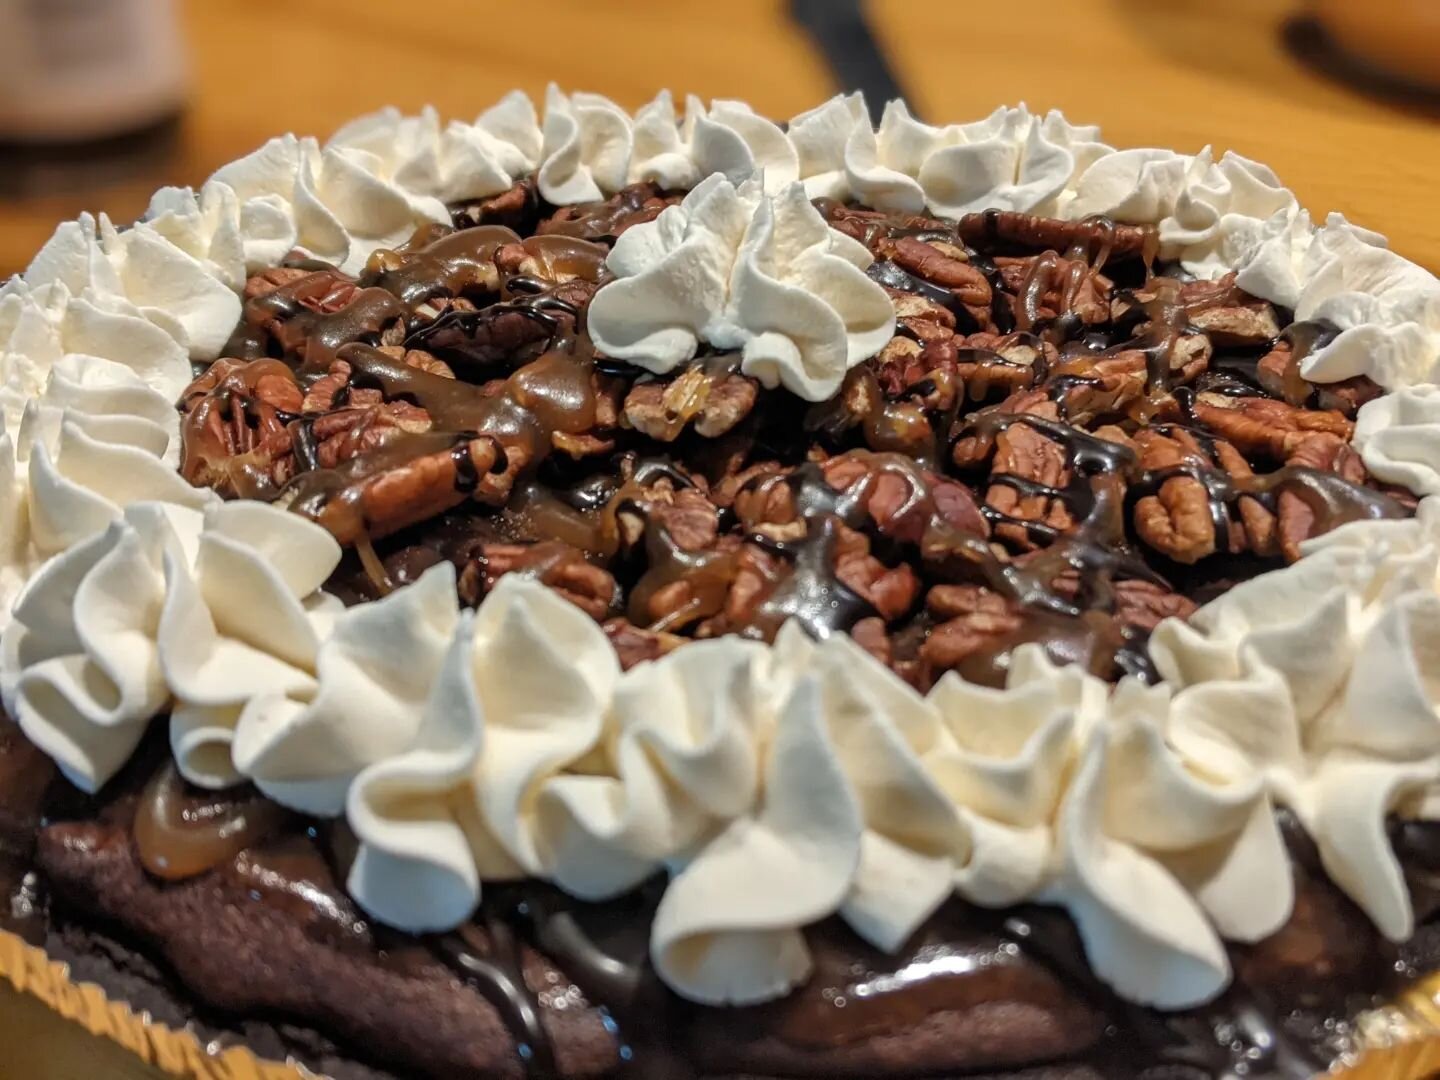 So! I was feeling a little ambitious last night and decided to make something new.

This is an Oreo pie crust filled with pecan and chocolate chip brownies and then baked. I then topped it with toasted pecan halves, made a homemade caramel drizzle, m